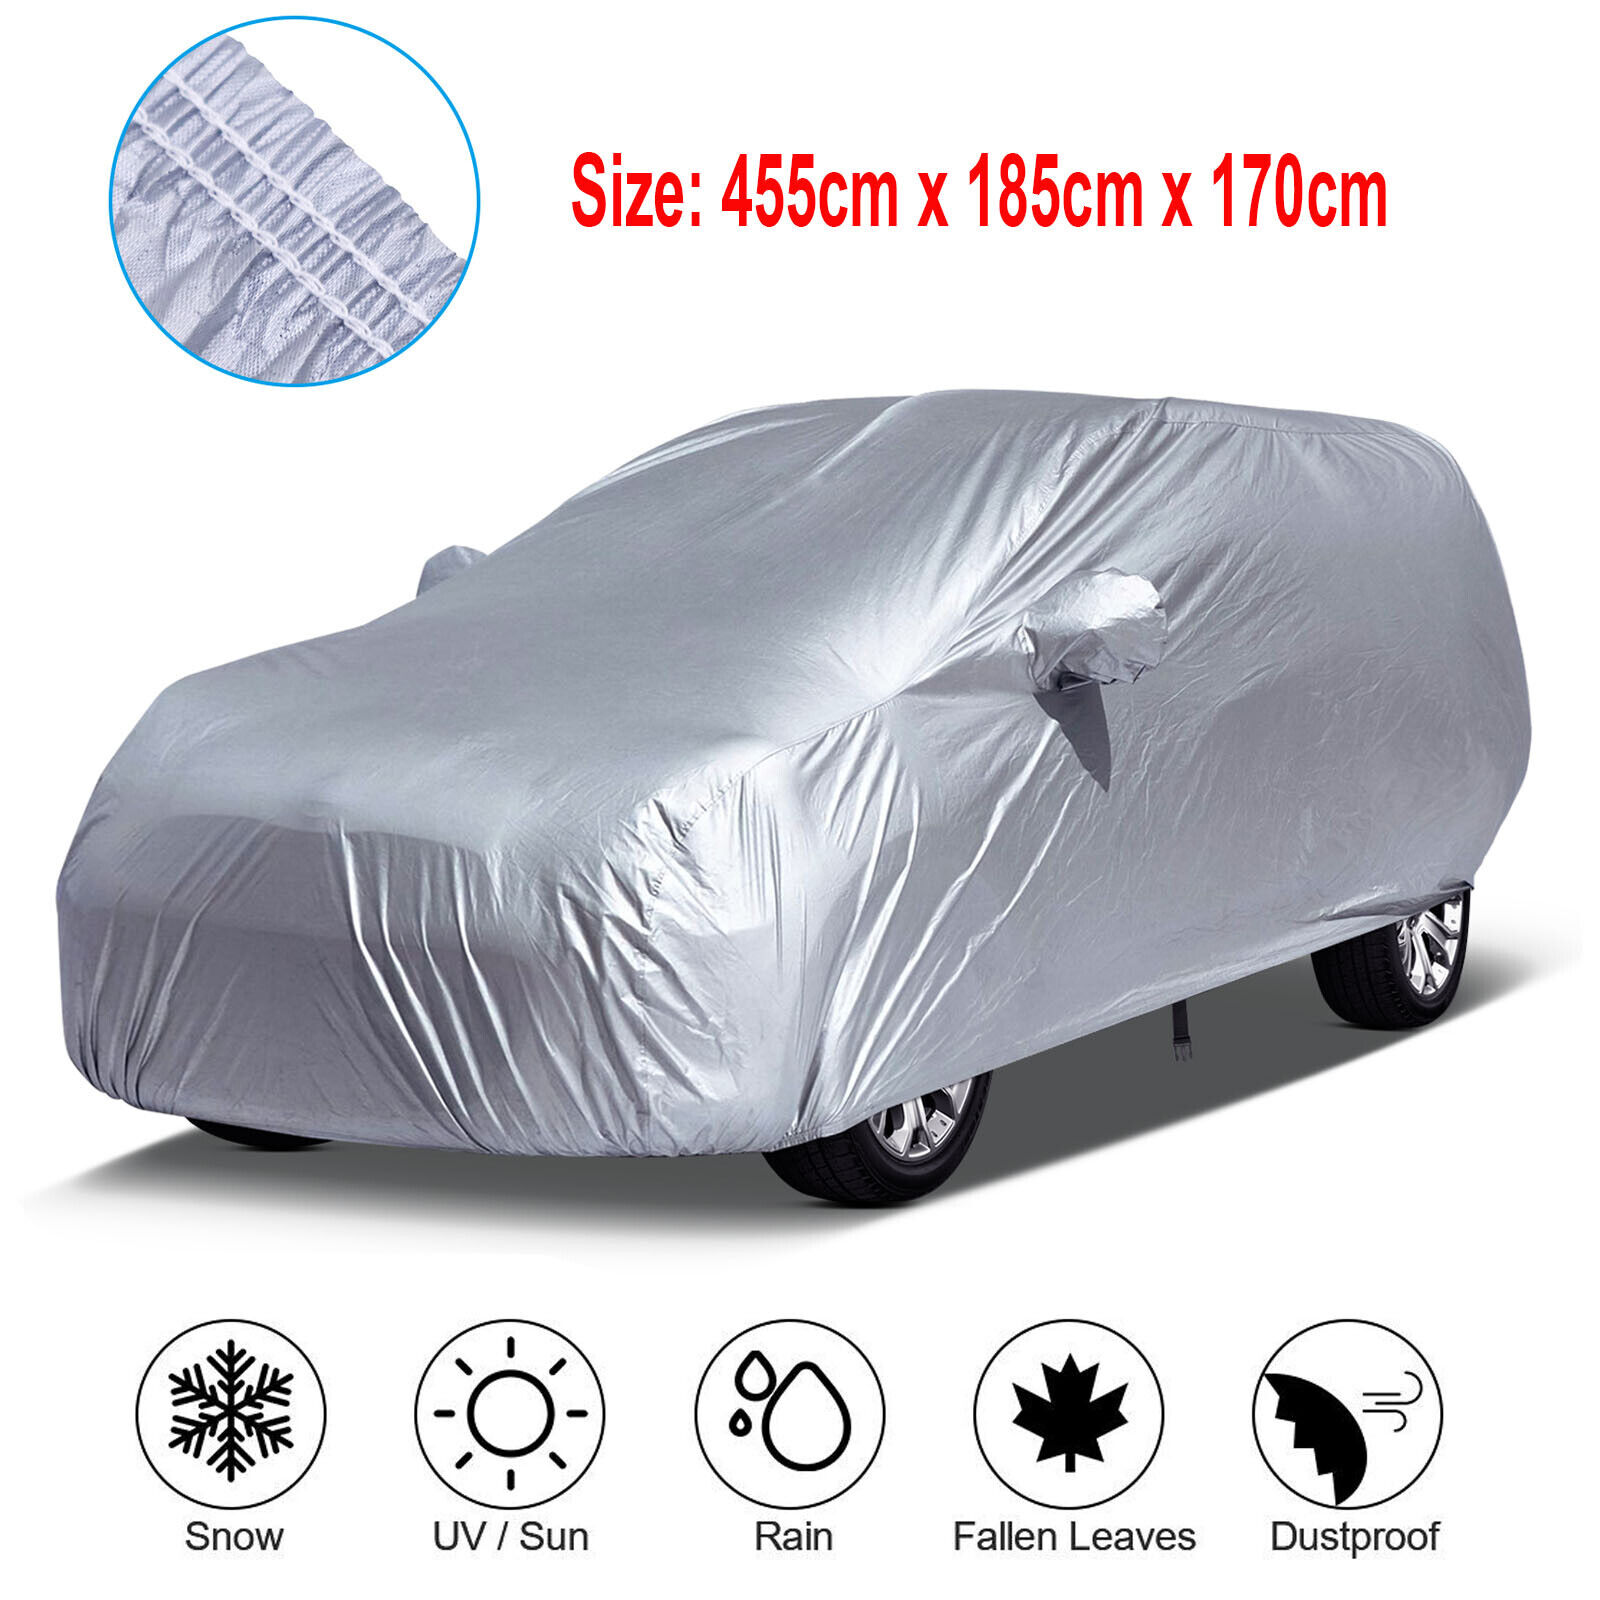 M - XXXL Full SUV Car Cover Waterproof Protection All Weather Universal For SUV